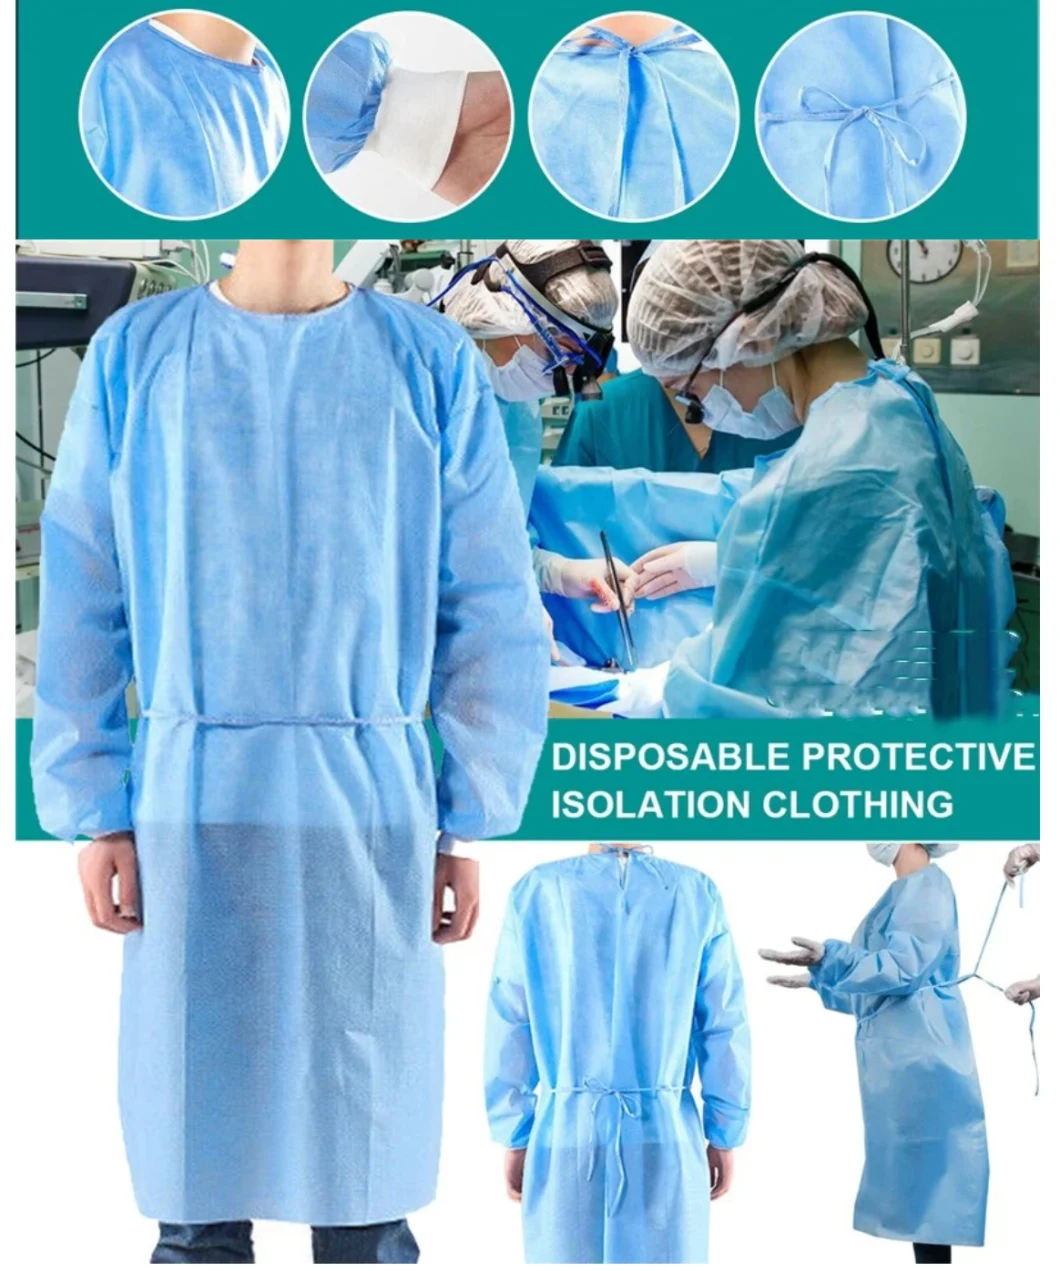 Factory AAMI Level 2 3 En13795 PP/PP+PE/SMS/SMMS Medical Disposable Reinforced Surgical Isolation Gown for Hospital Laboratory/Food Industry Healthcare